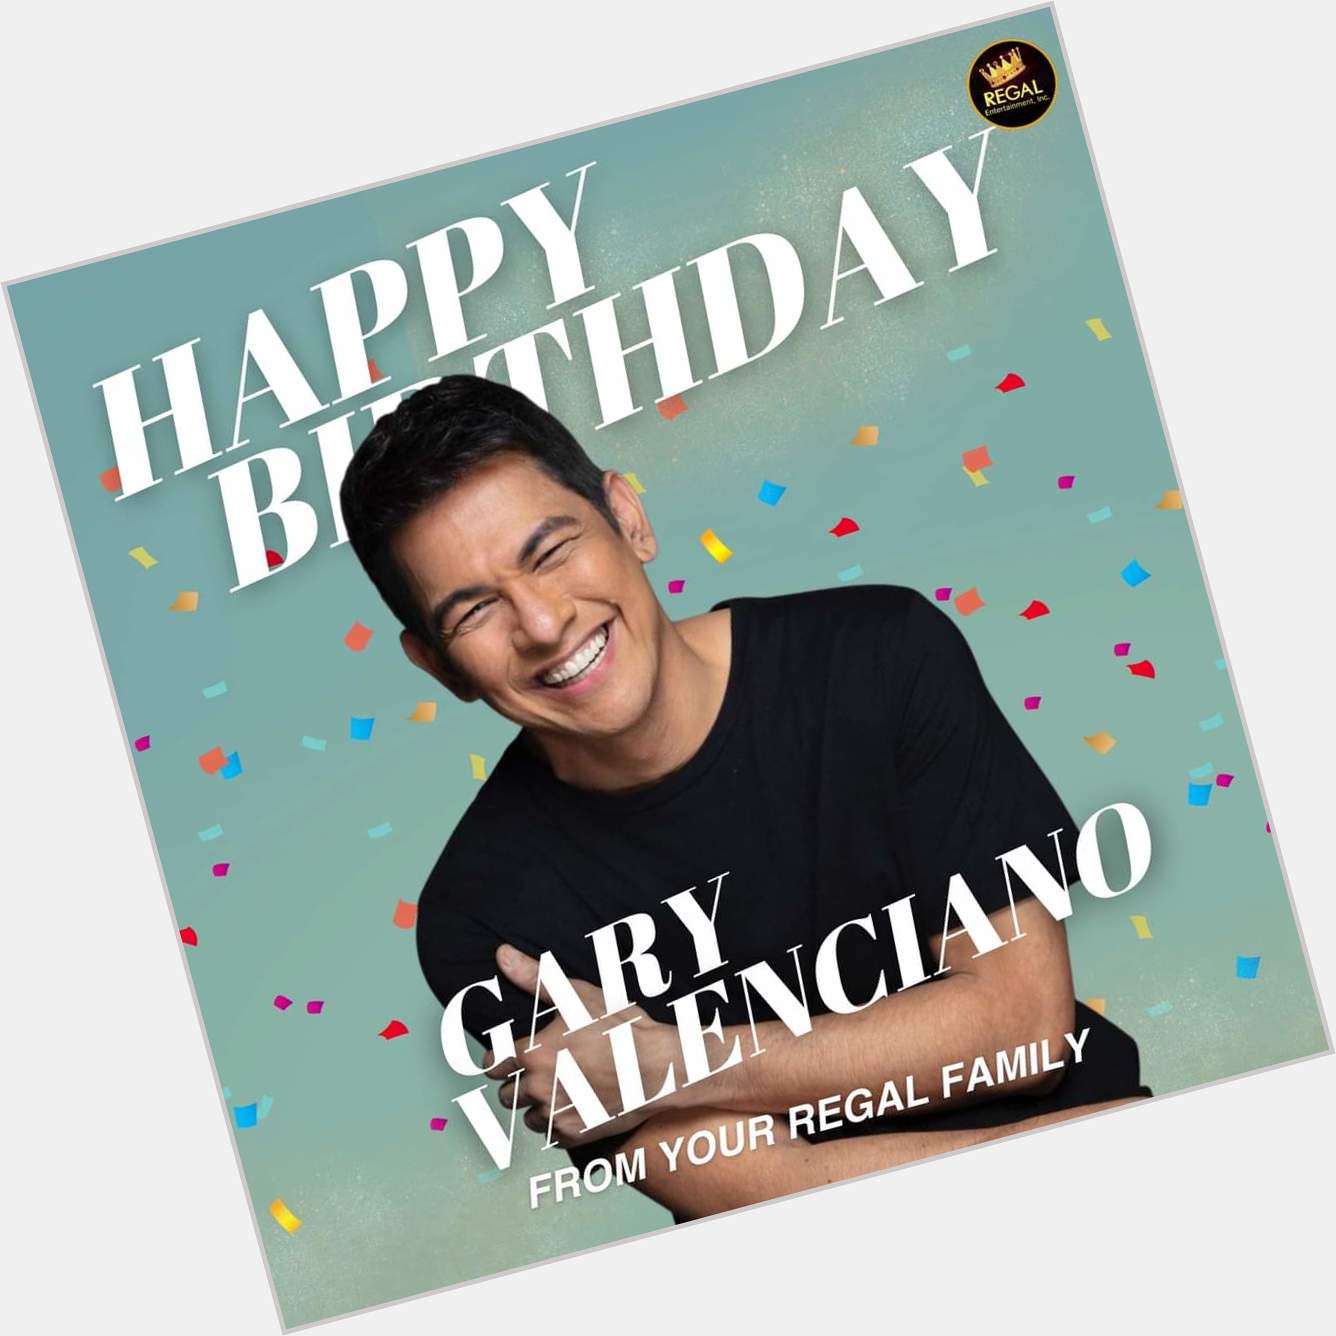 Happy Birthday, Gary Valenciano! We wish you all the best in life! From your Regal Family   